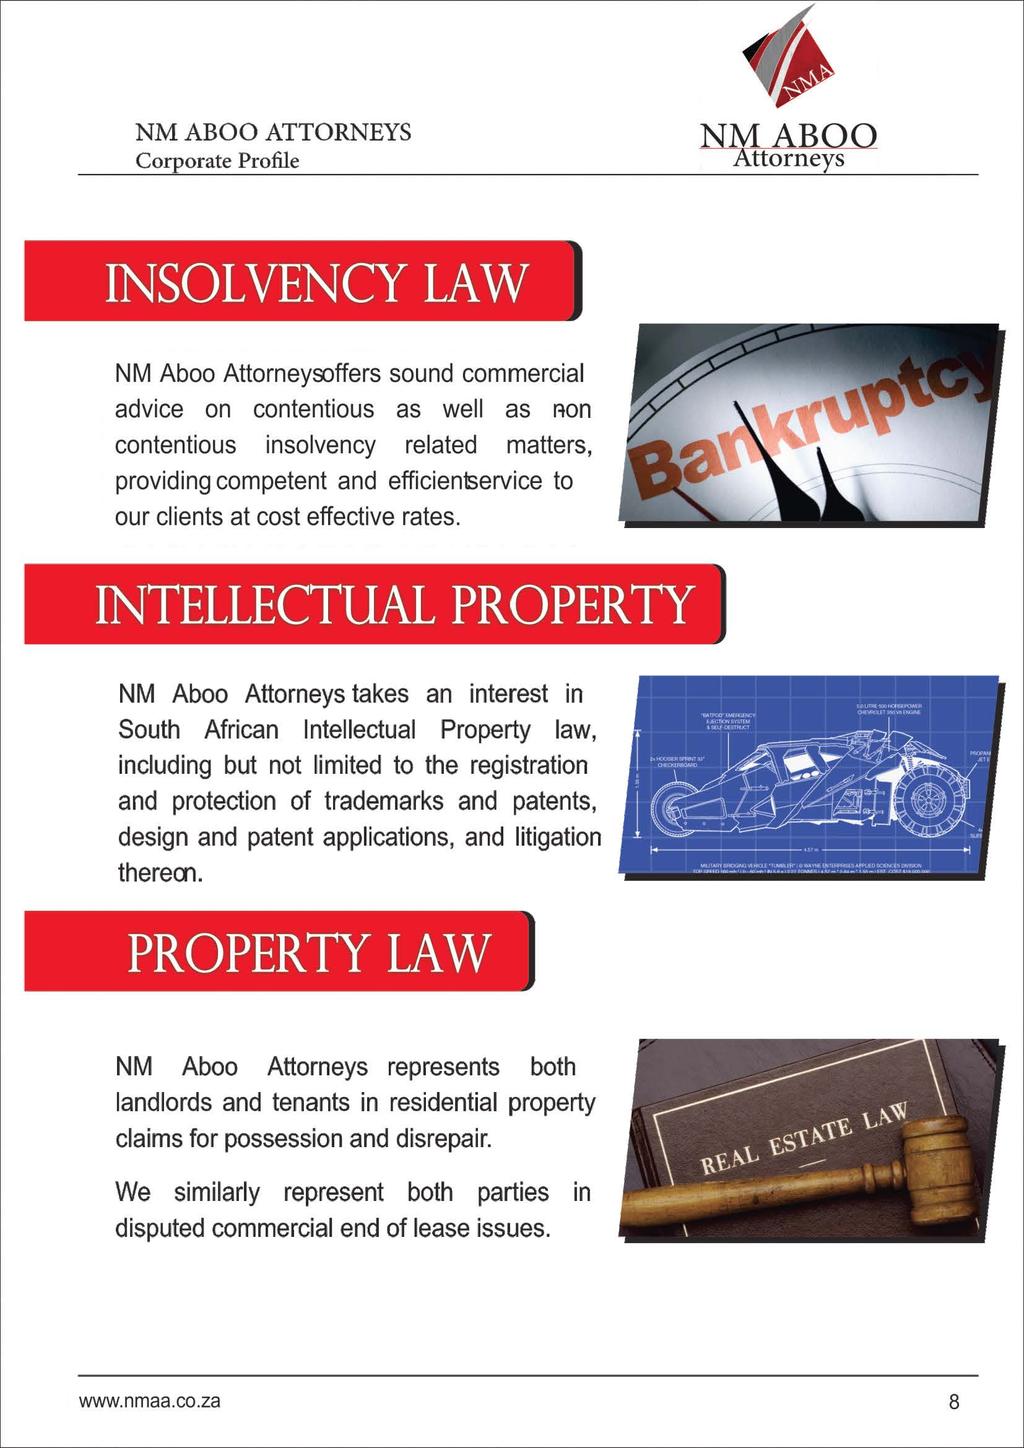 INSOLVENCY LAW NM Aboo Attorneyroffers sound commercial advice on contentious as well as Ron contentious insolvency related matters, providing competent and efficientservice to our clients at cost